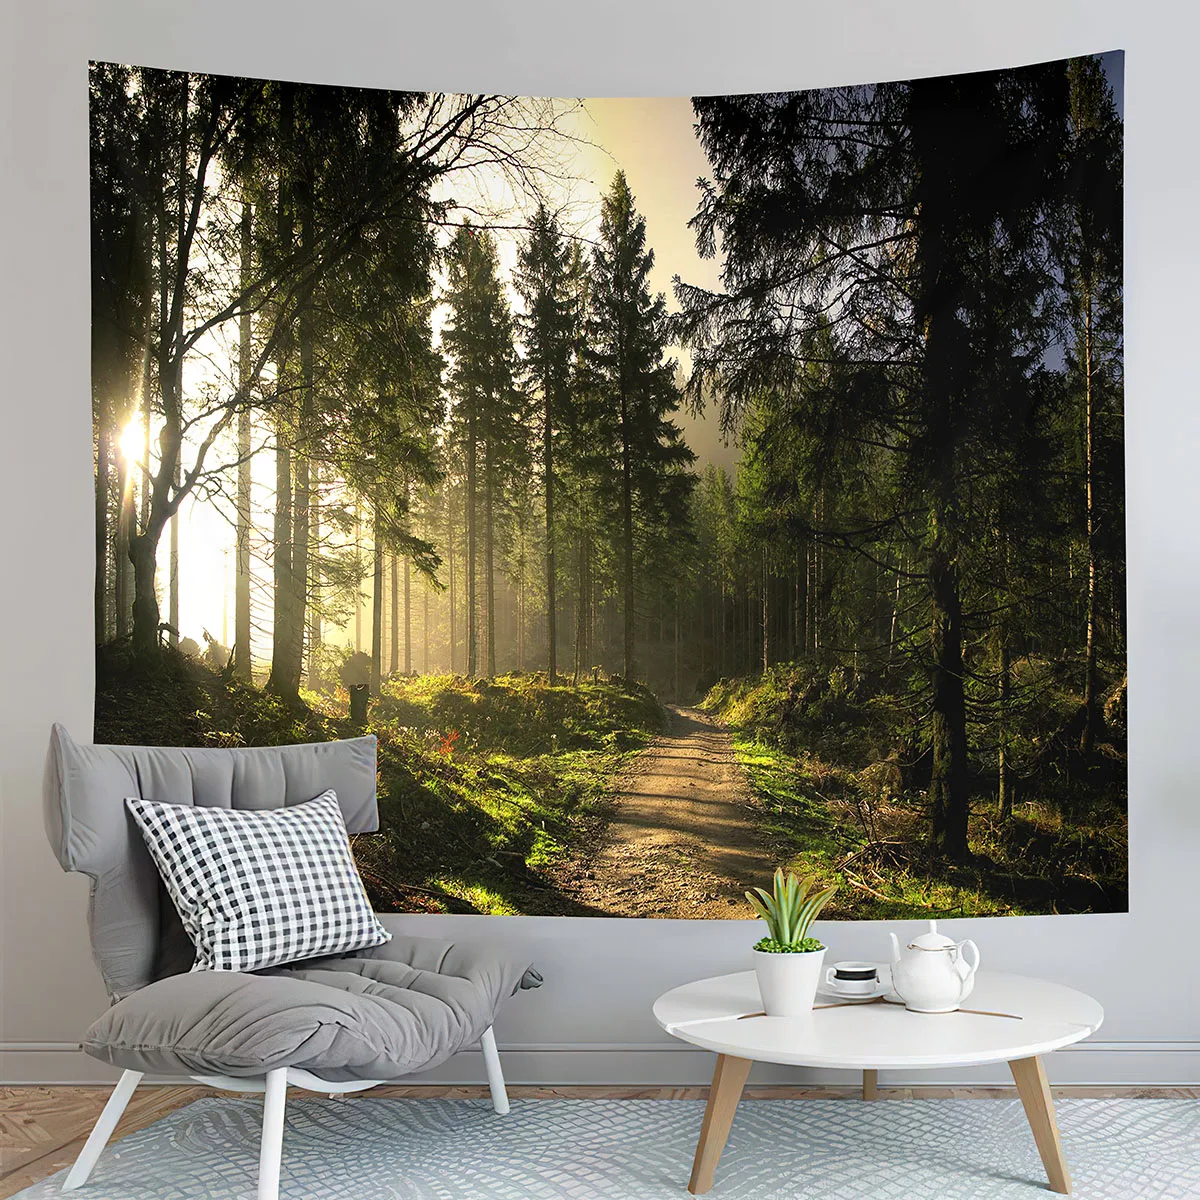 

Forest Tapestry Nature Landscape Tapestry Green Woodland Tapestry Wall Hanging Decor Tapestries Bedroom Home Living Room Dorm